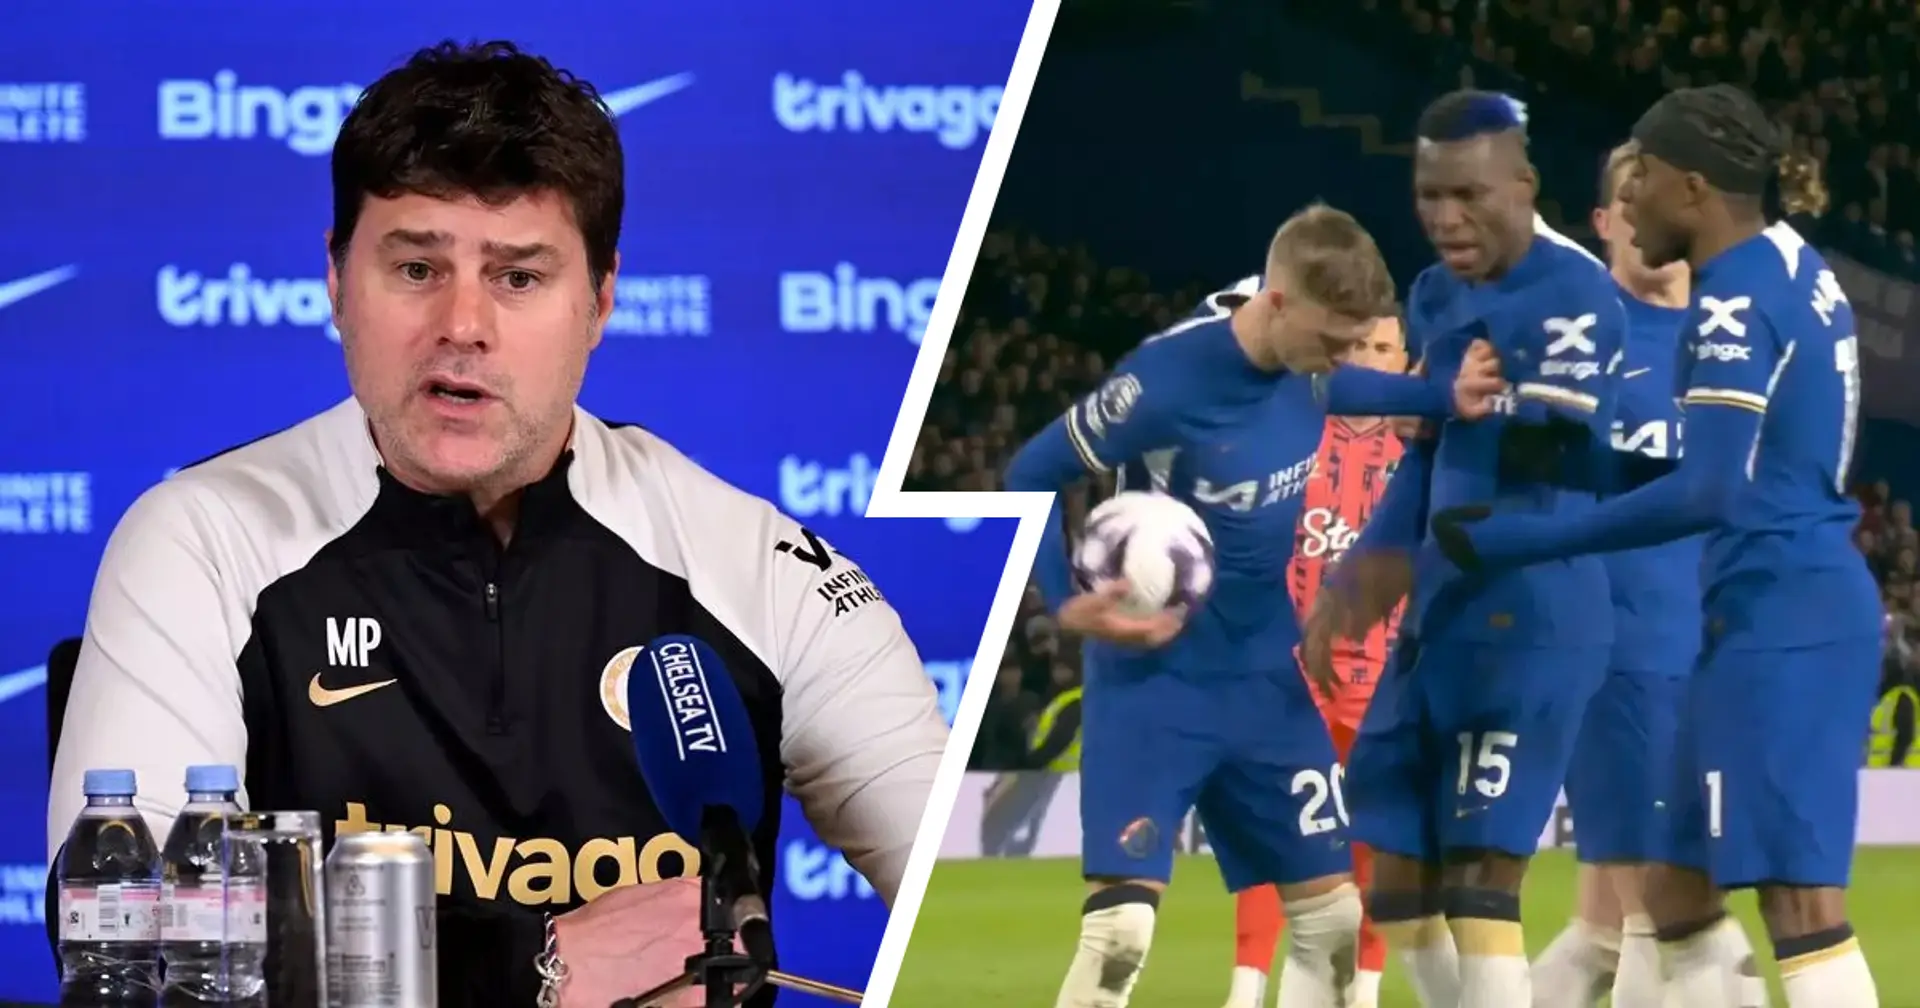 'We move on': Pochettino reveals clear message he sent Chelsea players over penalty embarrassment